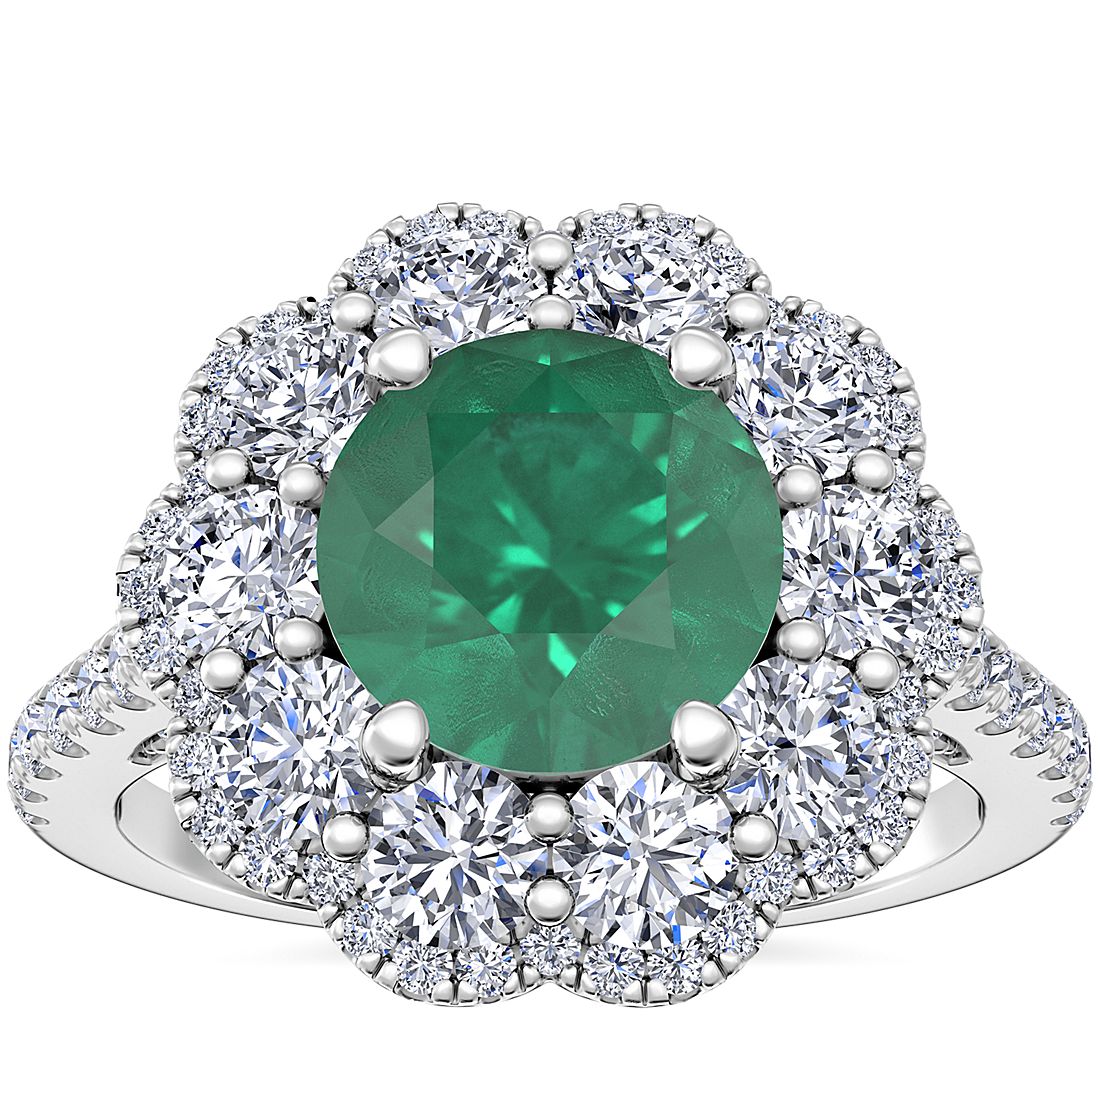 Vintage Diamond Halo Engagement Ring with Round Emerald in Platinum (8mm)